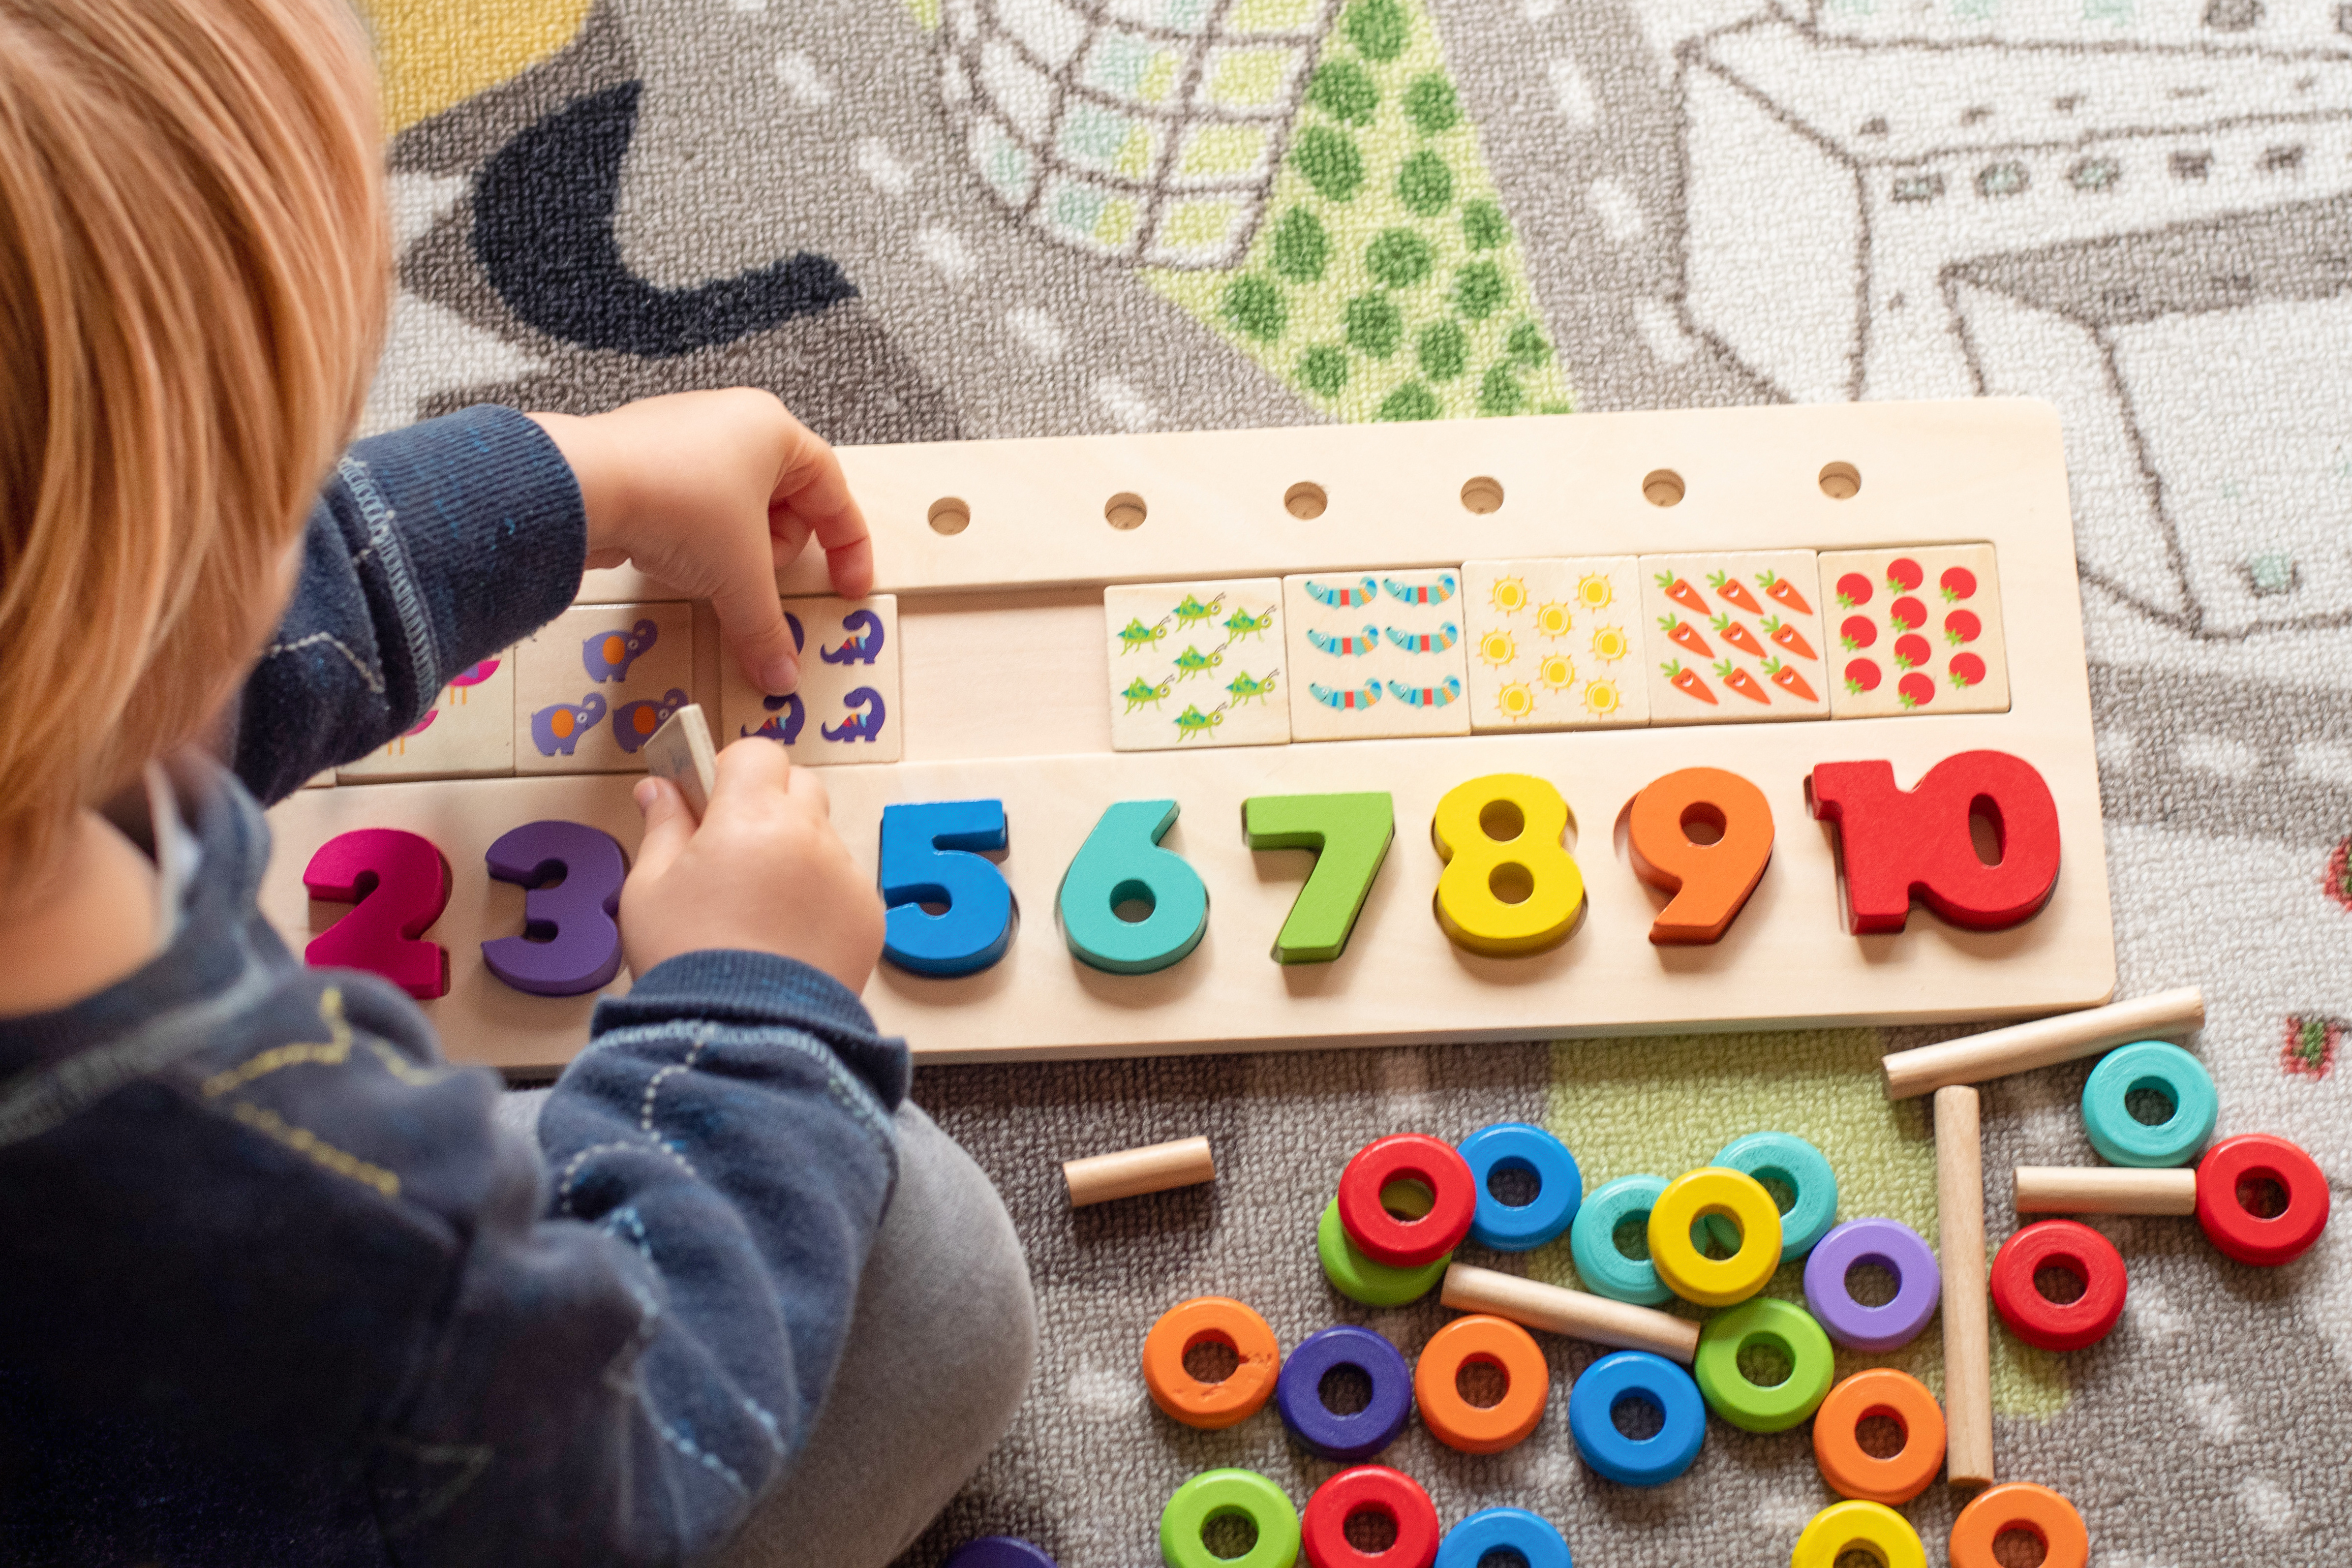 adobestock_476989942_child-playing-wooden-number-puzzle.jpeg